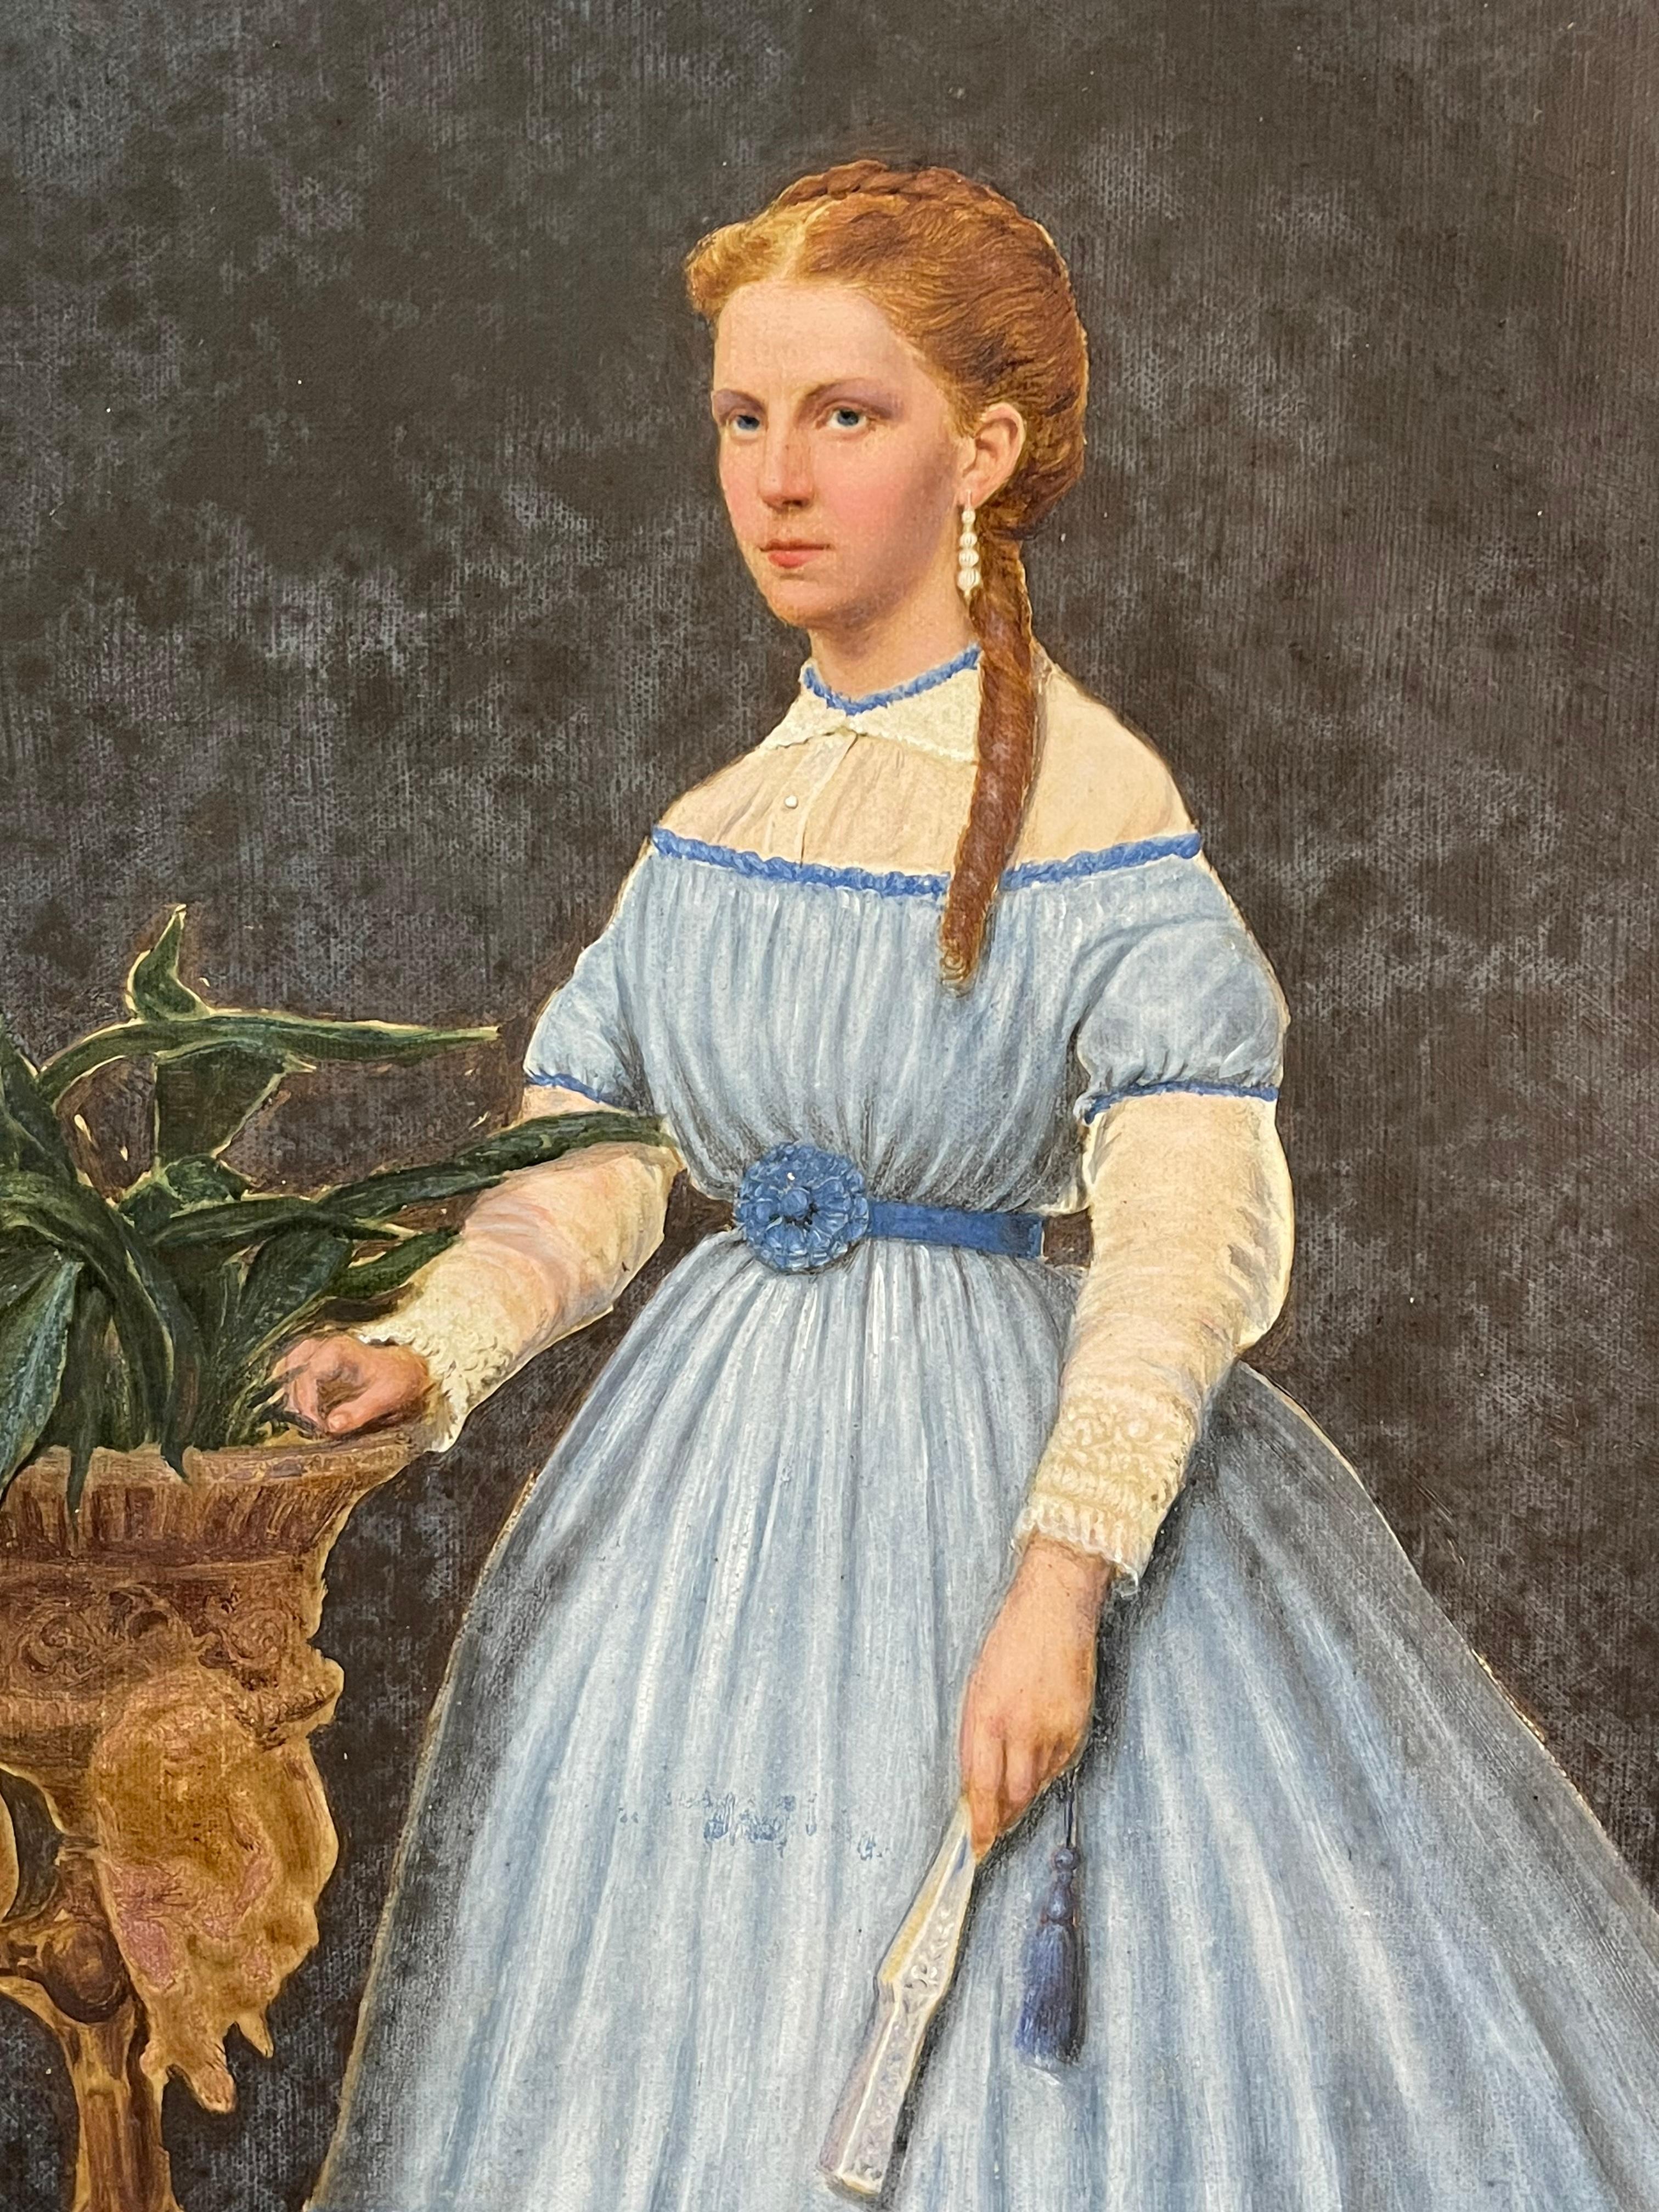 Beautiful painting in gouache technique depicting a distinguished young lady.
The noblewoman presents a pose of rare elegance, with one hand resting on a planter and the other holding a closed fan.
The grace, period, style and quality all point to